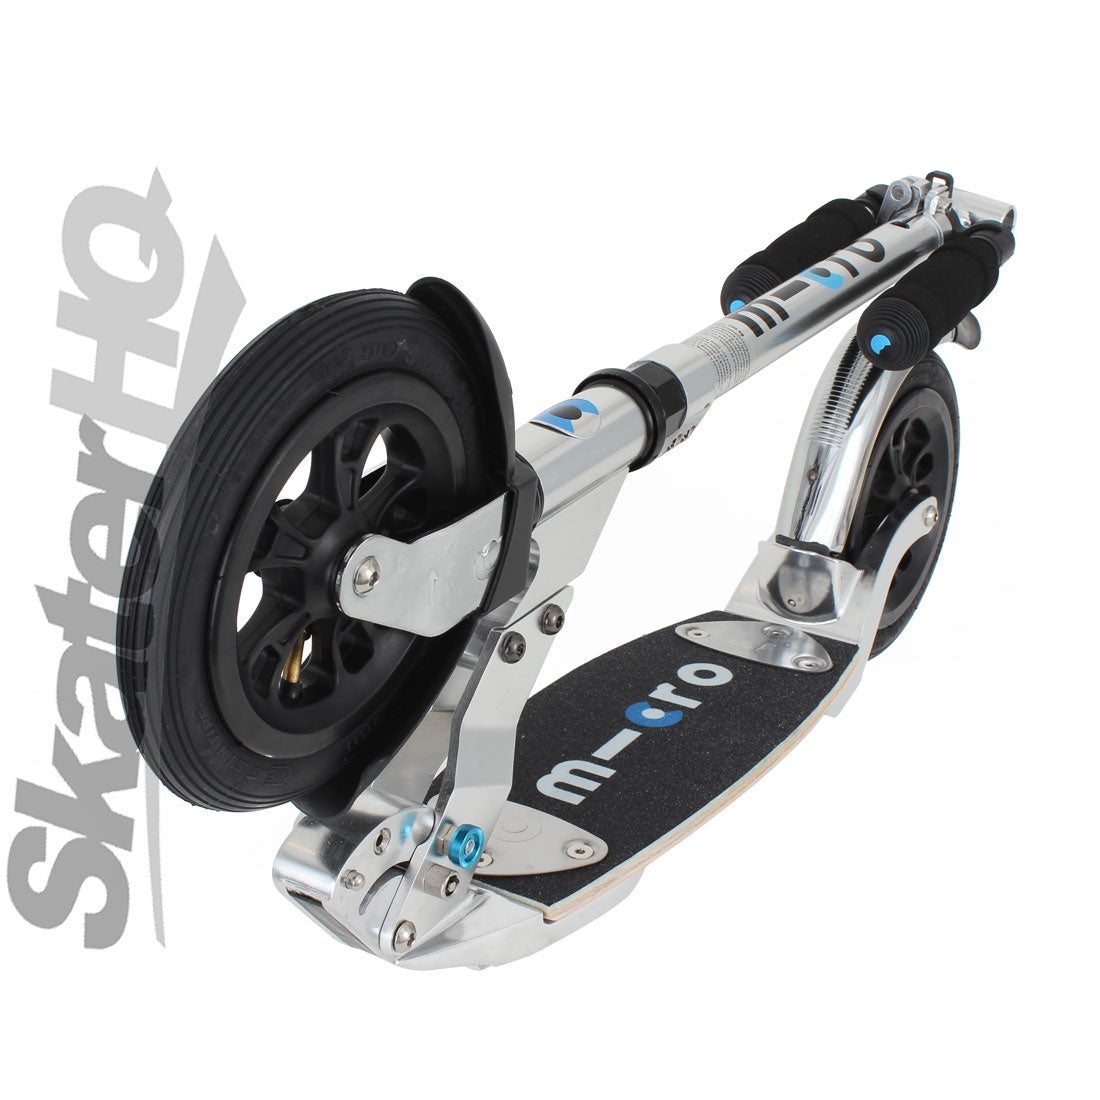 Micro Flex Air Scooter - Silver Scooter Completes Rec